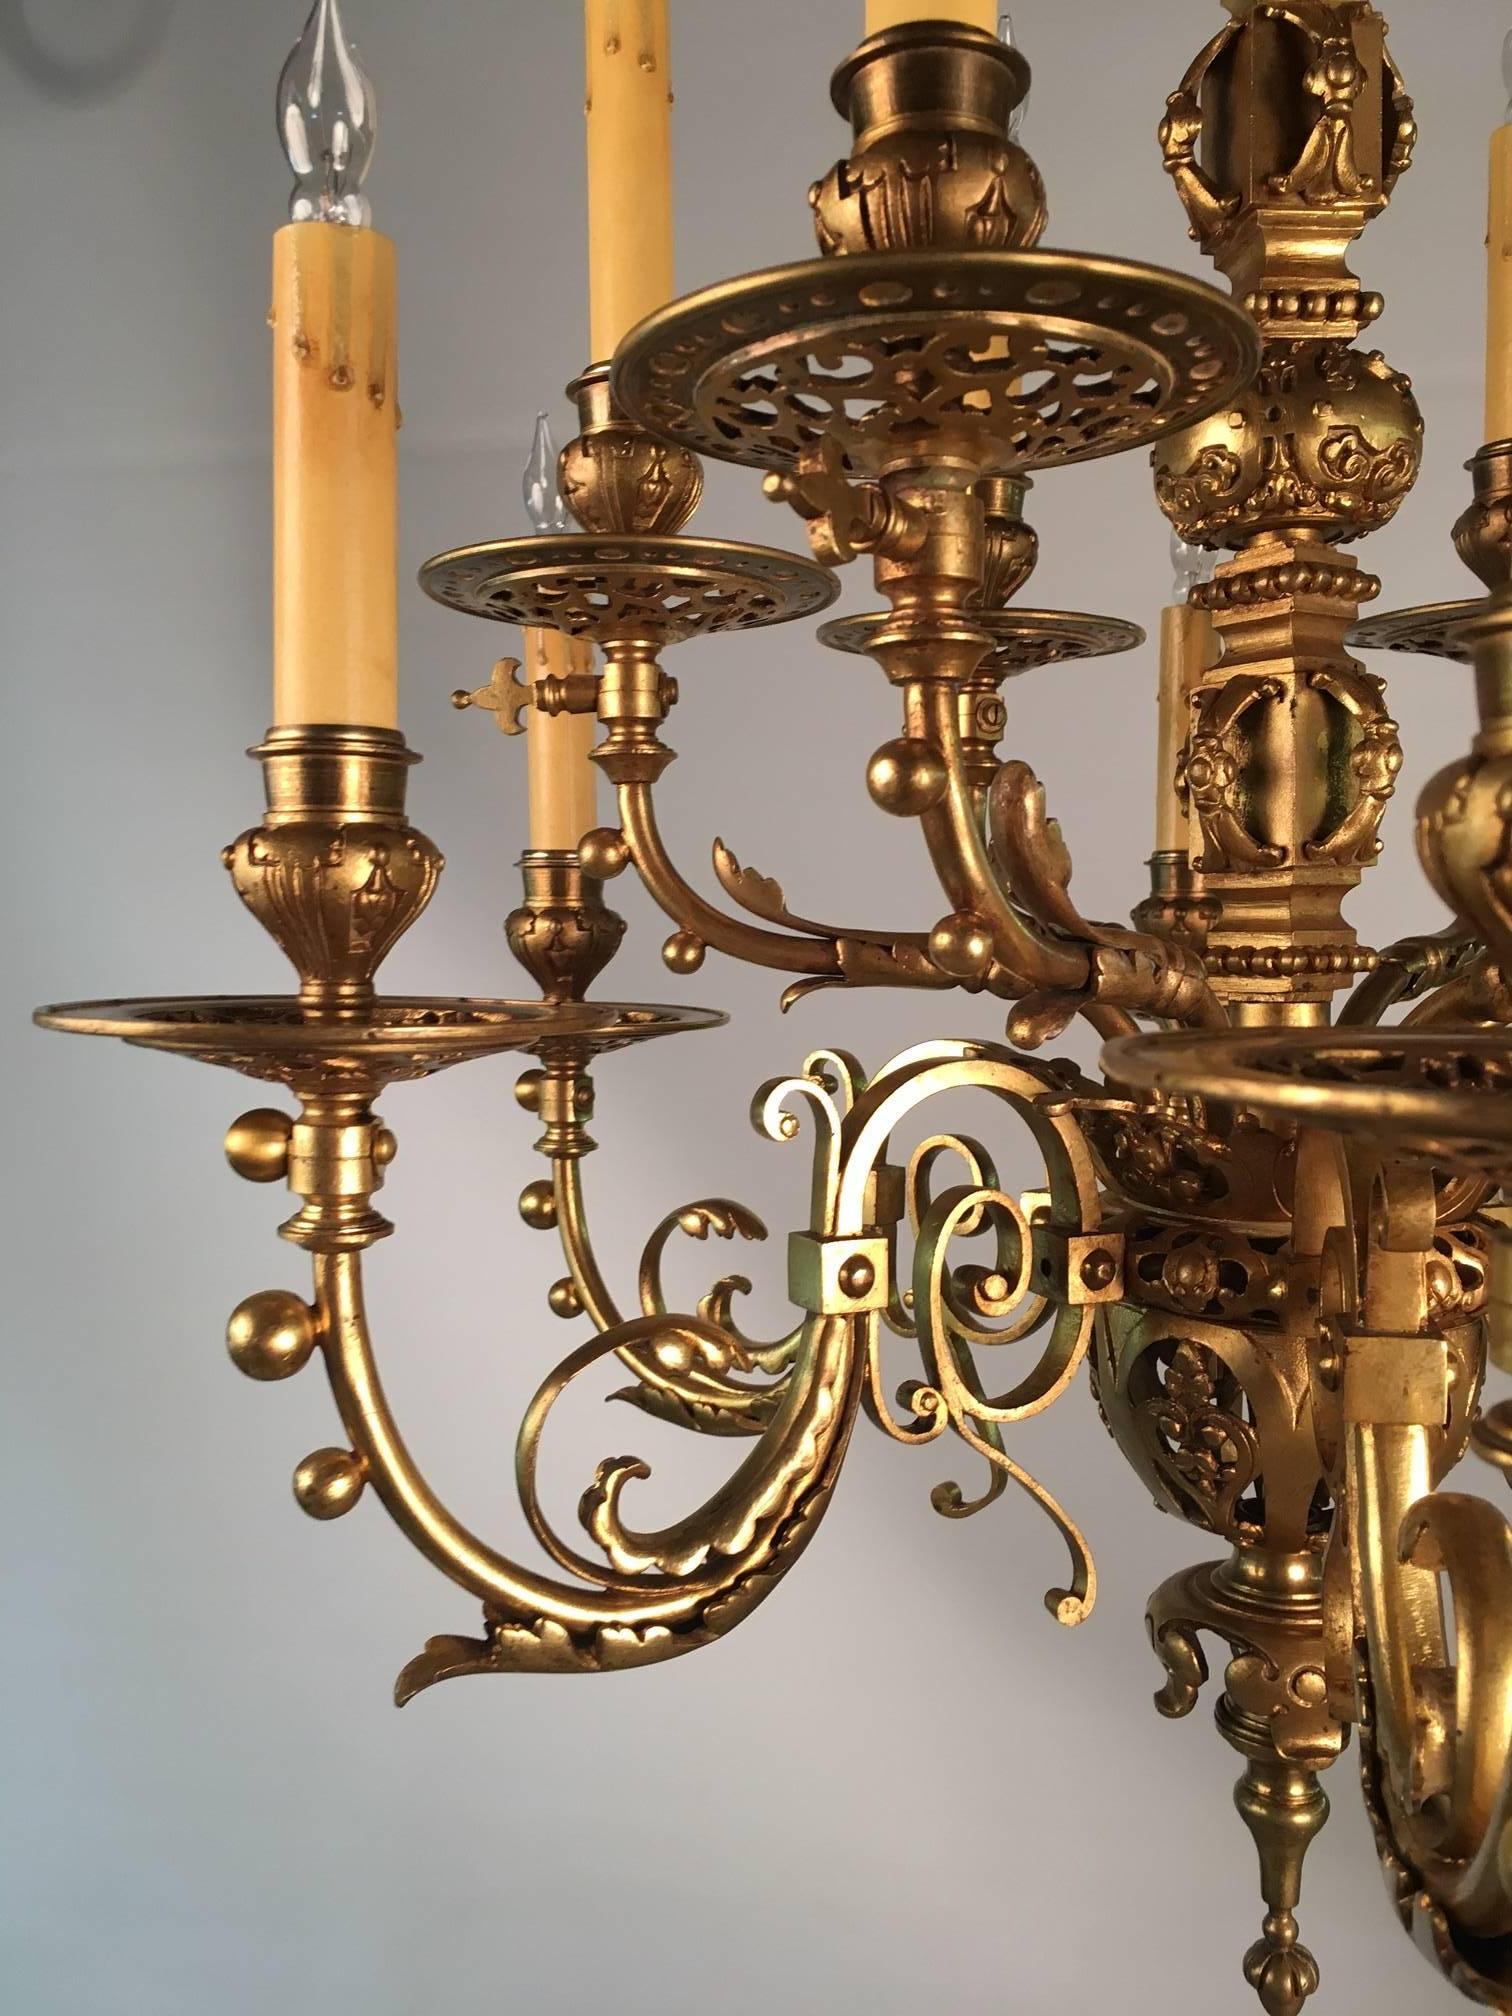 An antique twelve-light neo-Renaissance gilt bronze chandelier, the arms modeled with scrolling acanthus, the drip pans and central spherical globes pierced. This fixture was originally a gasolier which dates it approximately to the last half of the